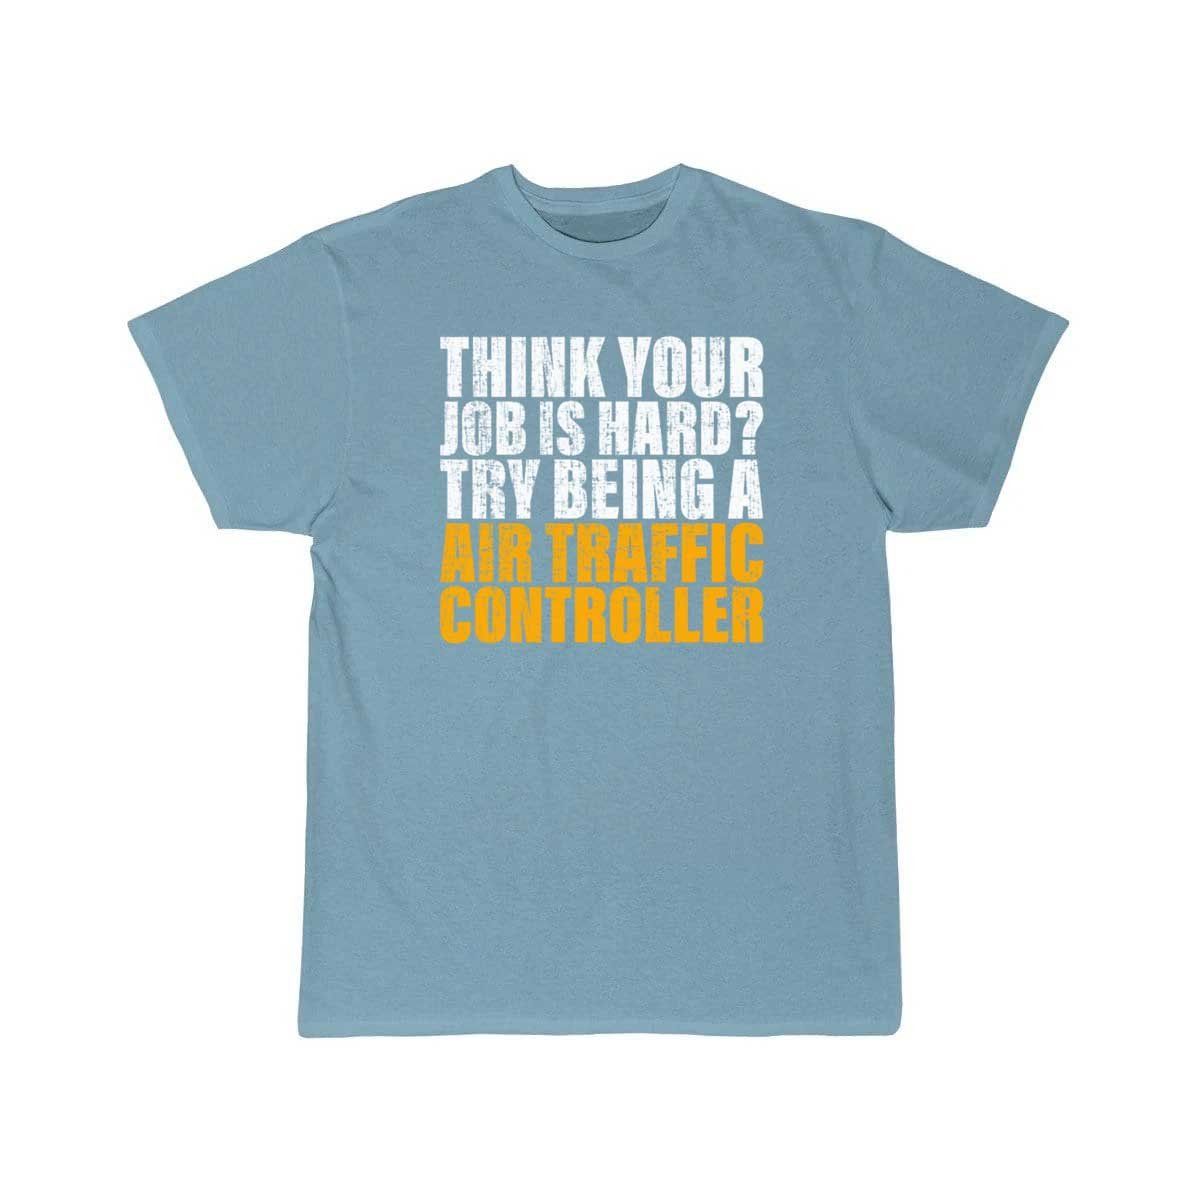 Try Being A Air Traffic Controller Design for ATC T-SHIRT THE AV8R